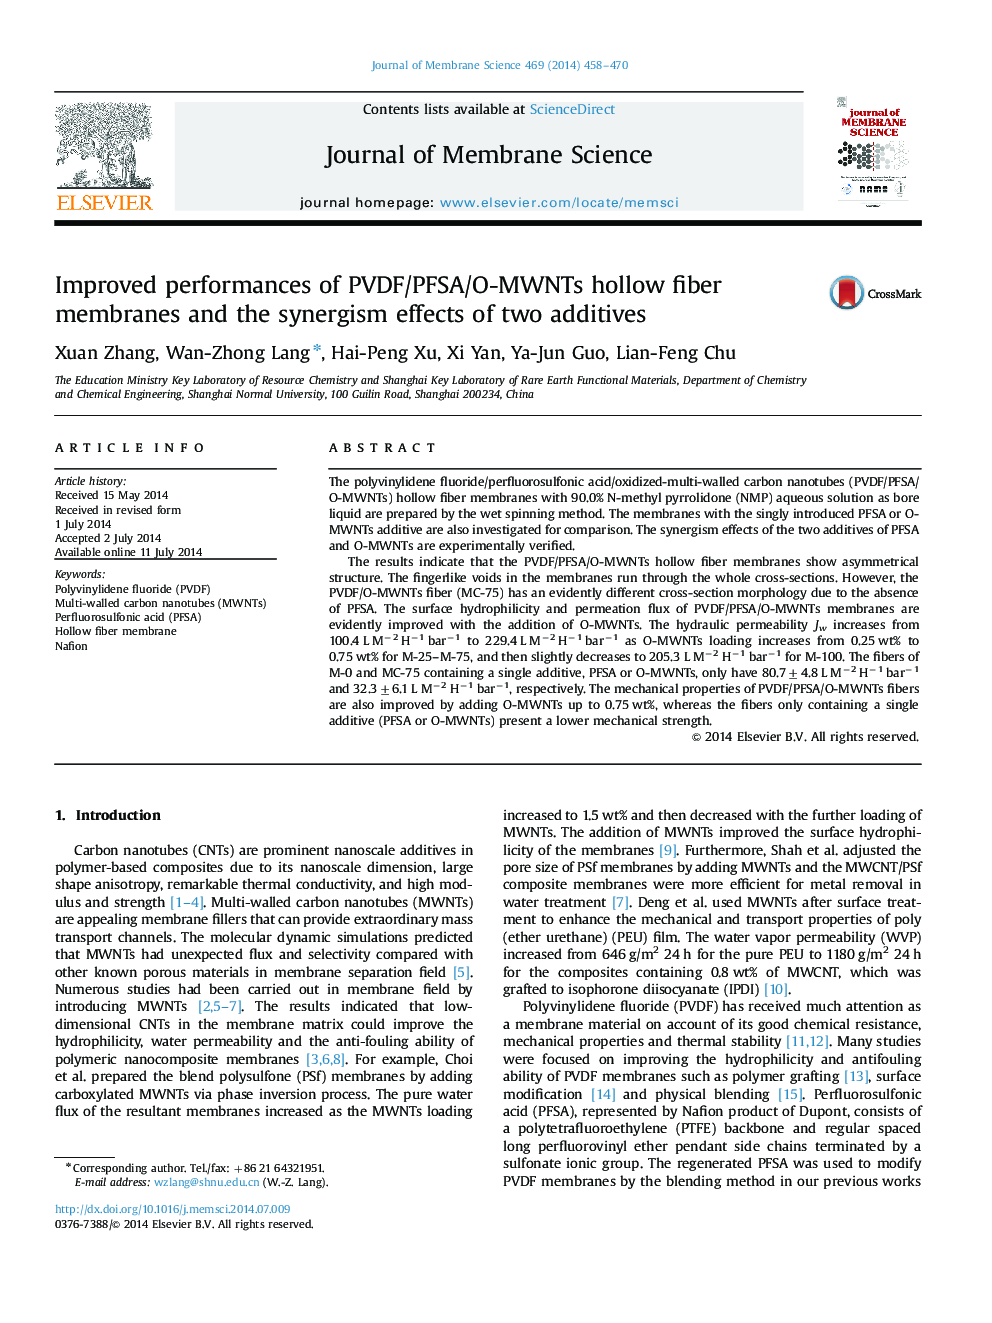 Improved performances of PVDF/PFSA/O-MWNTs hollow fiber membranes and the synergism effects of two additives